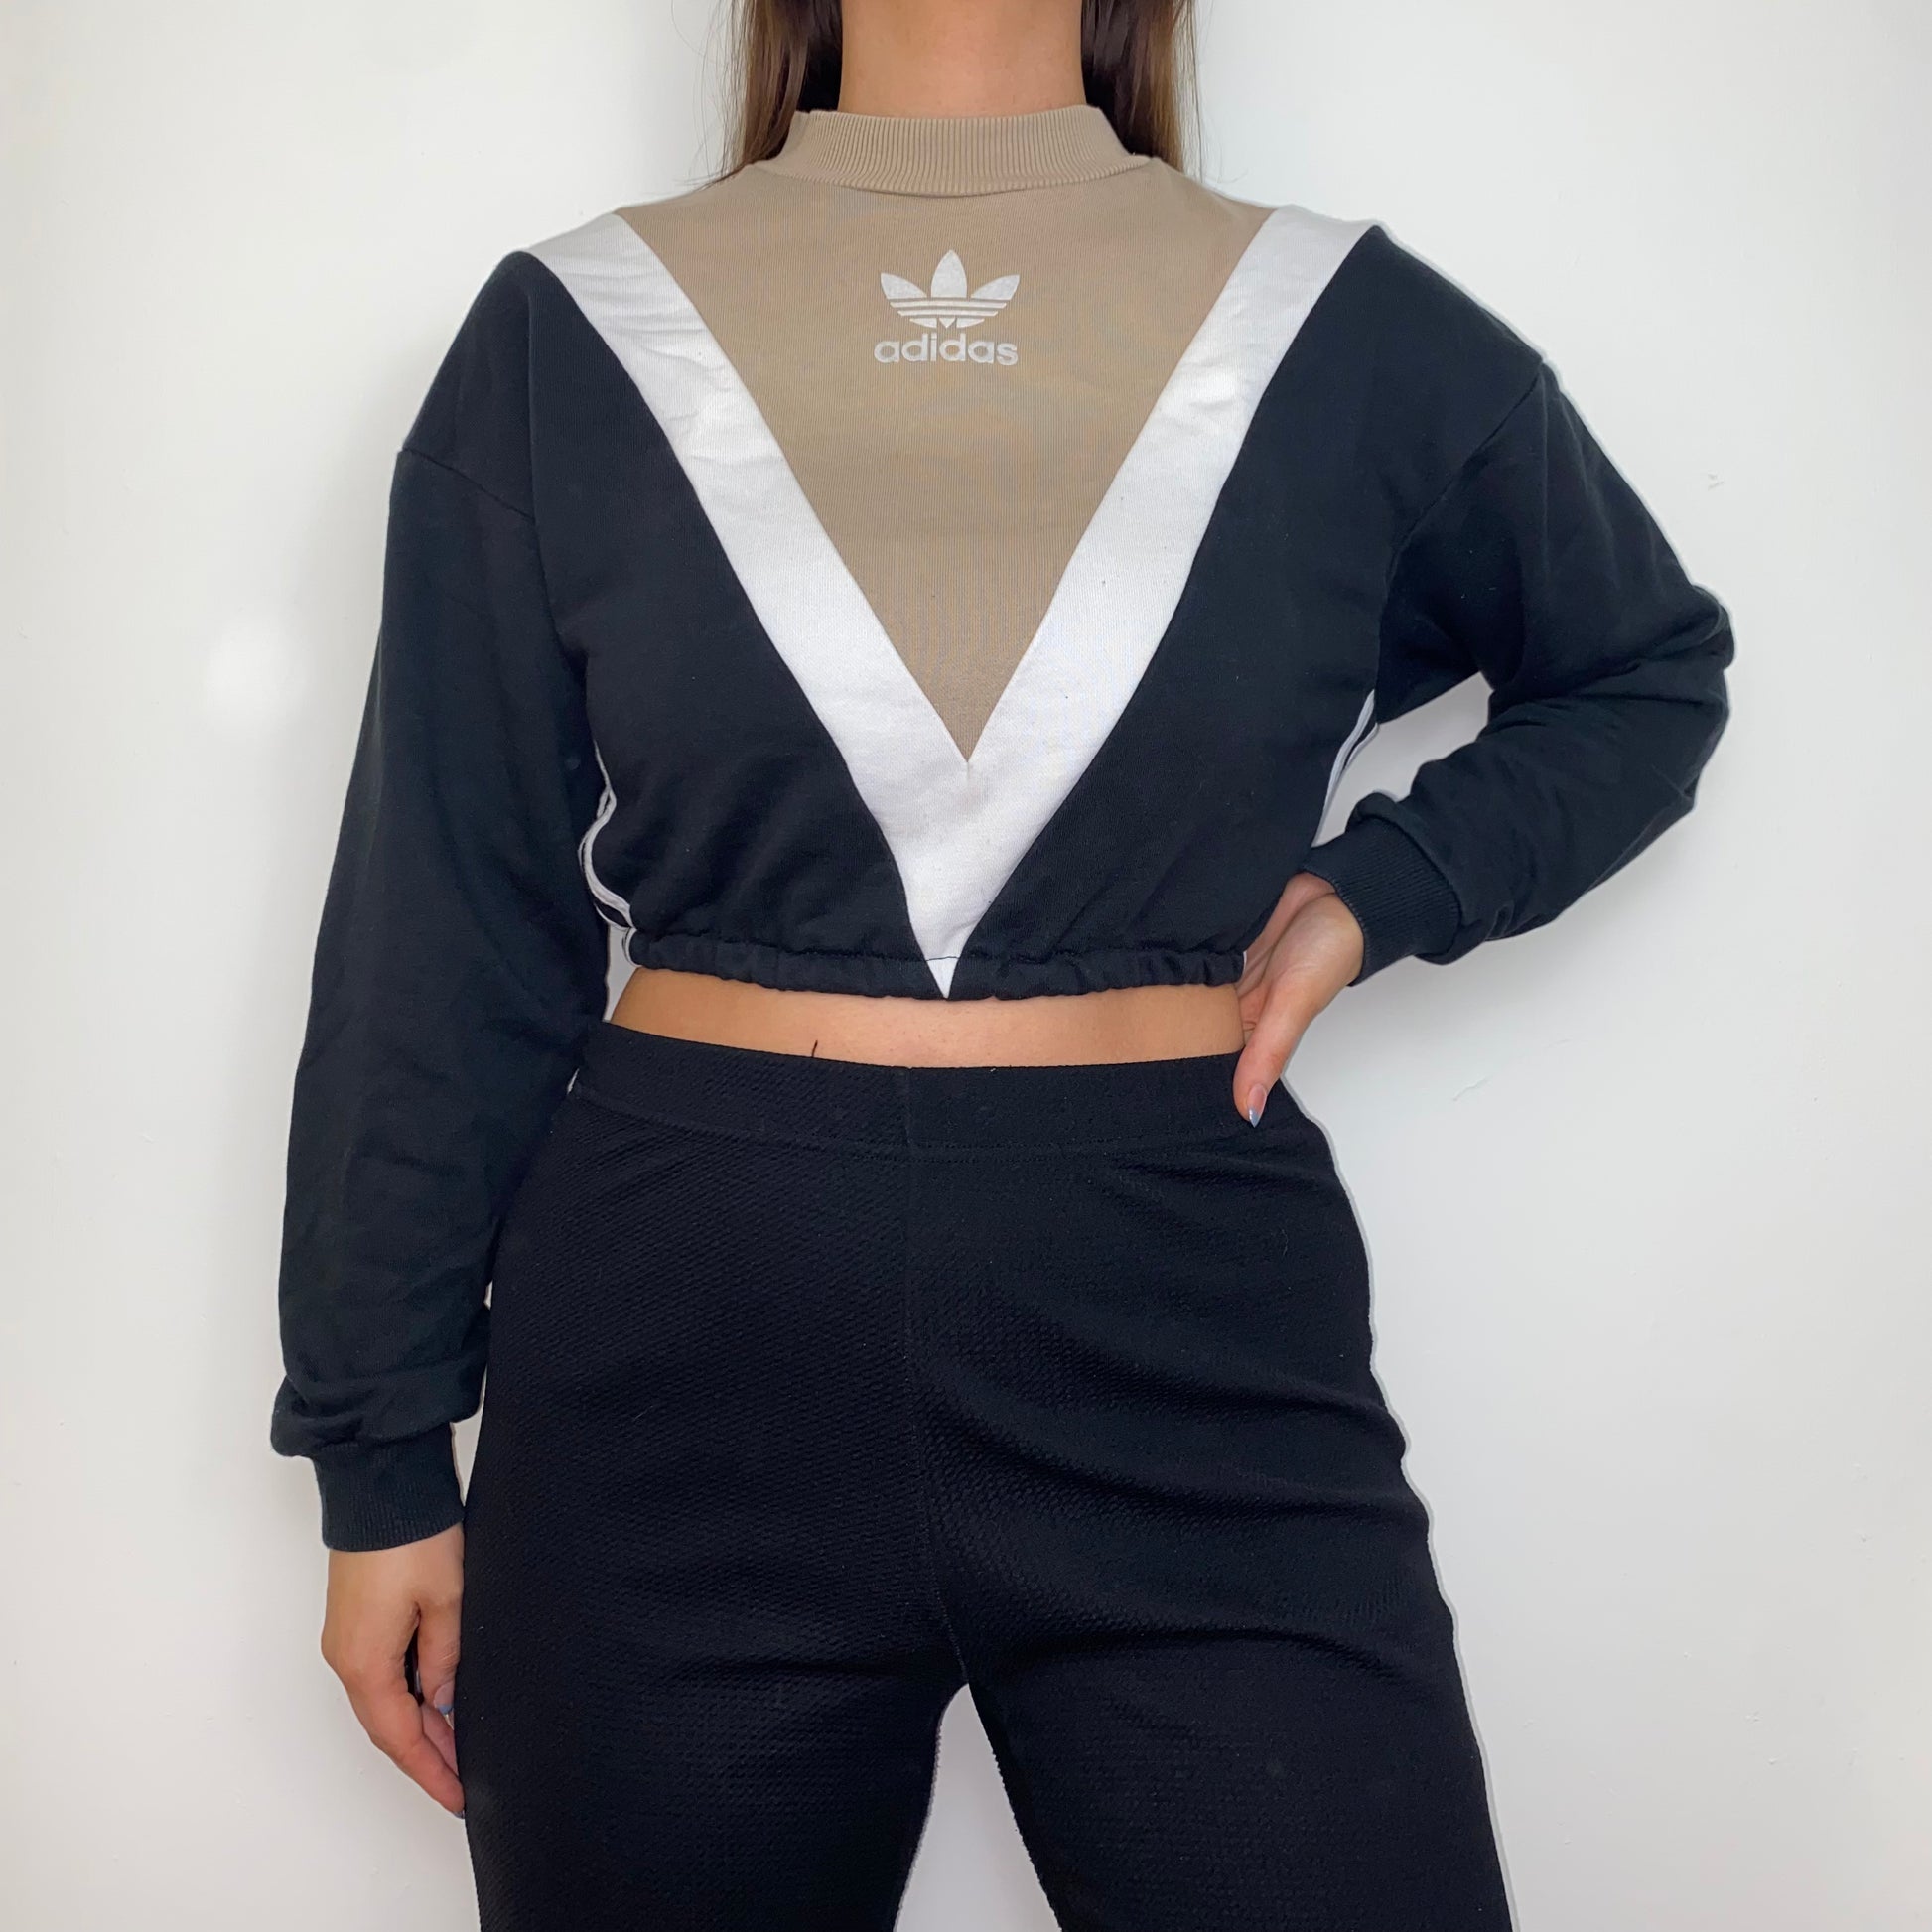 black and beige cropped hoodie with white adidas logo shown on a model wearing black trousers